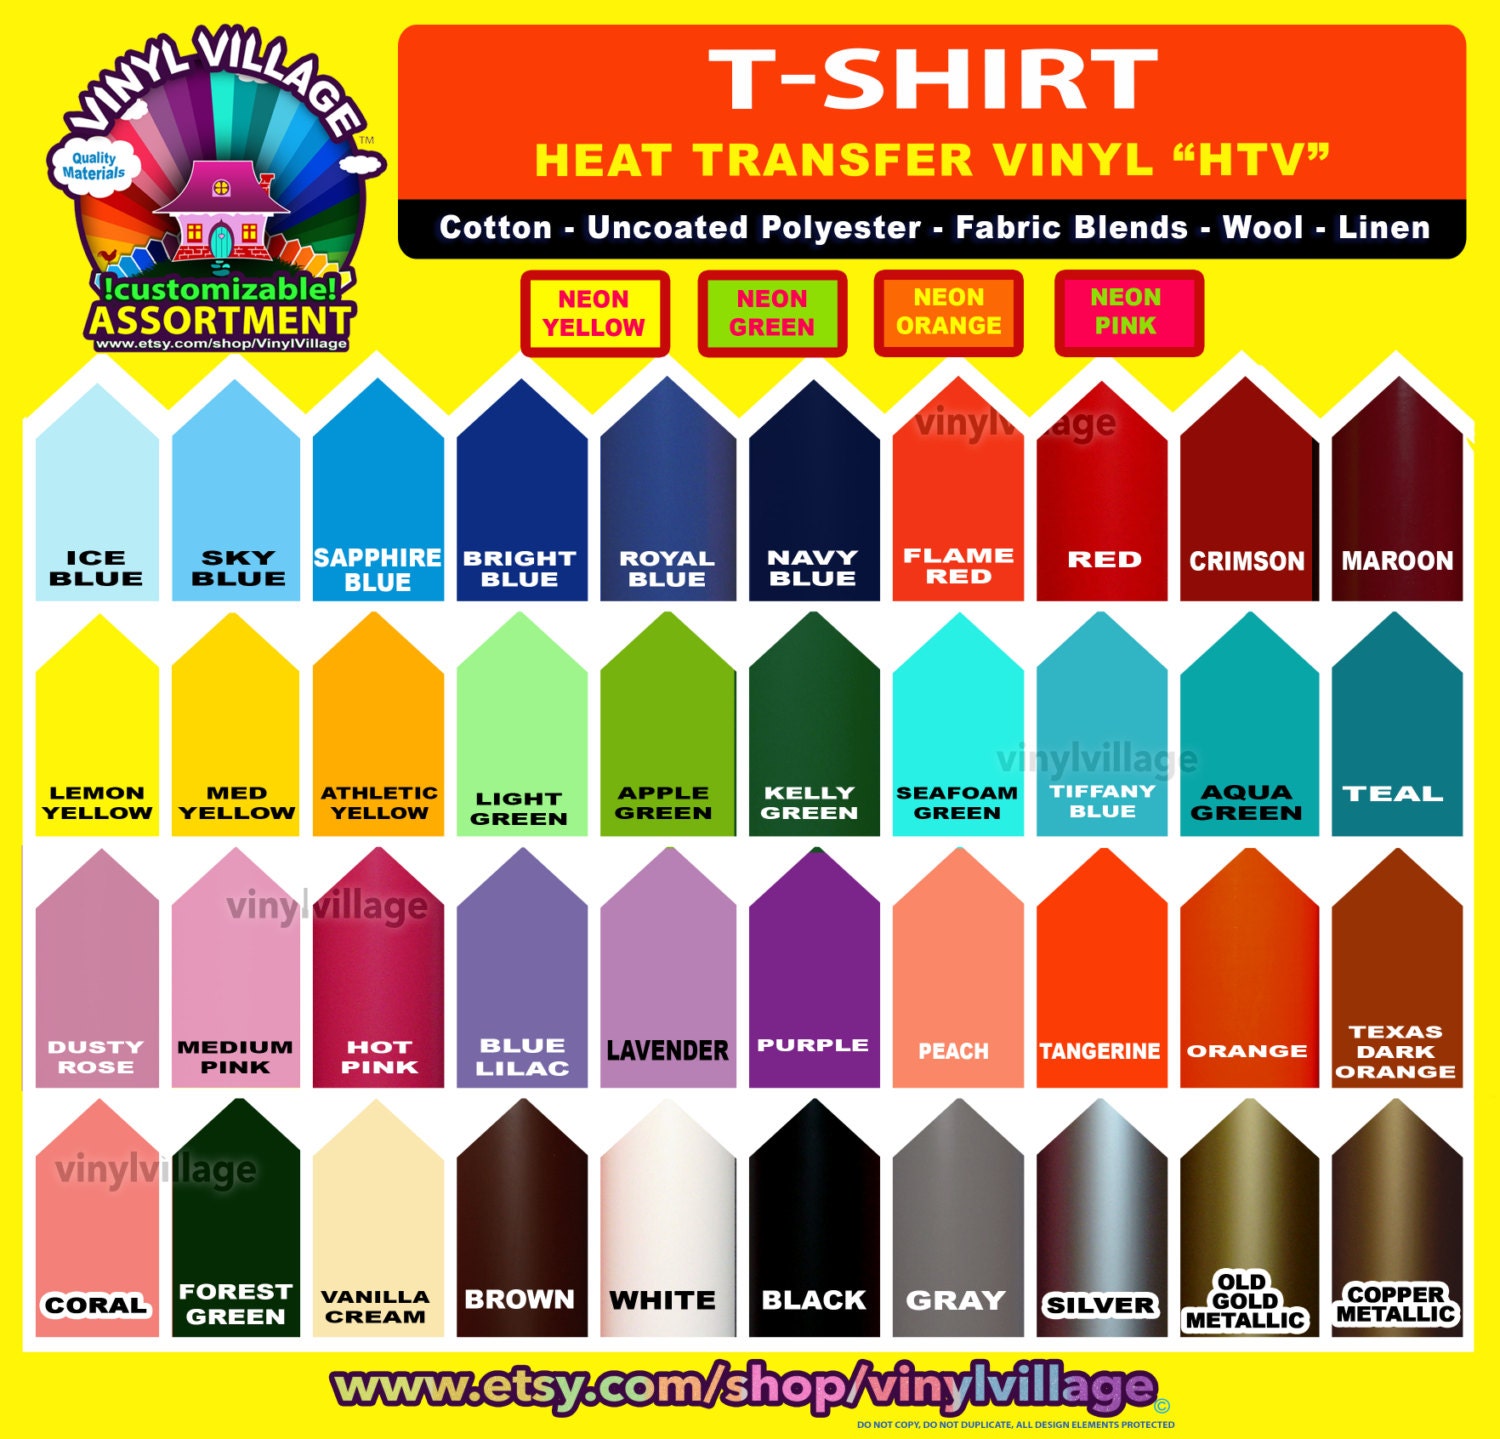 PU Heat Transfer Vinyl (HTV): 10 Pack 12 x 10 Sheets,HTV Vinyl Pack for T Shirts & Other Fabrics, Easy to Cut, Weed & Press (Aqua, 10 Pack)